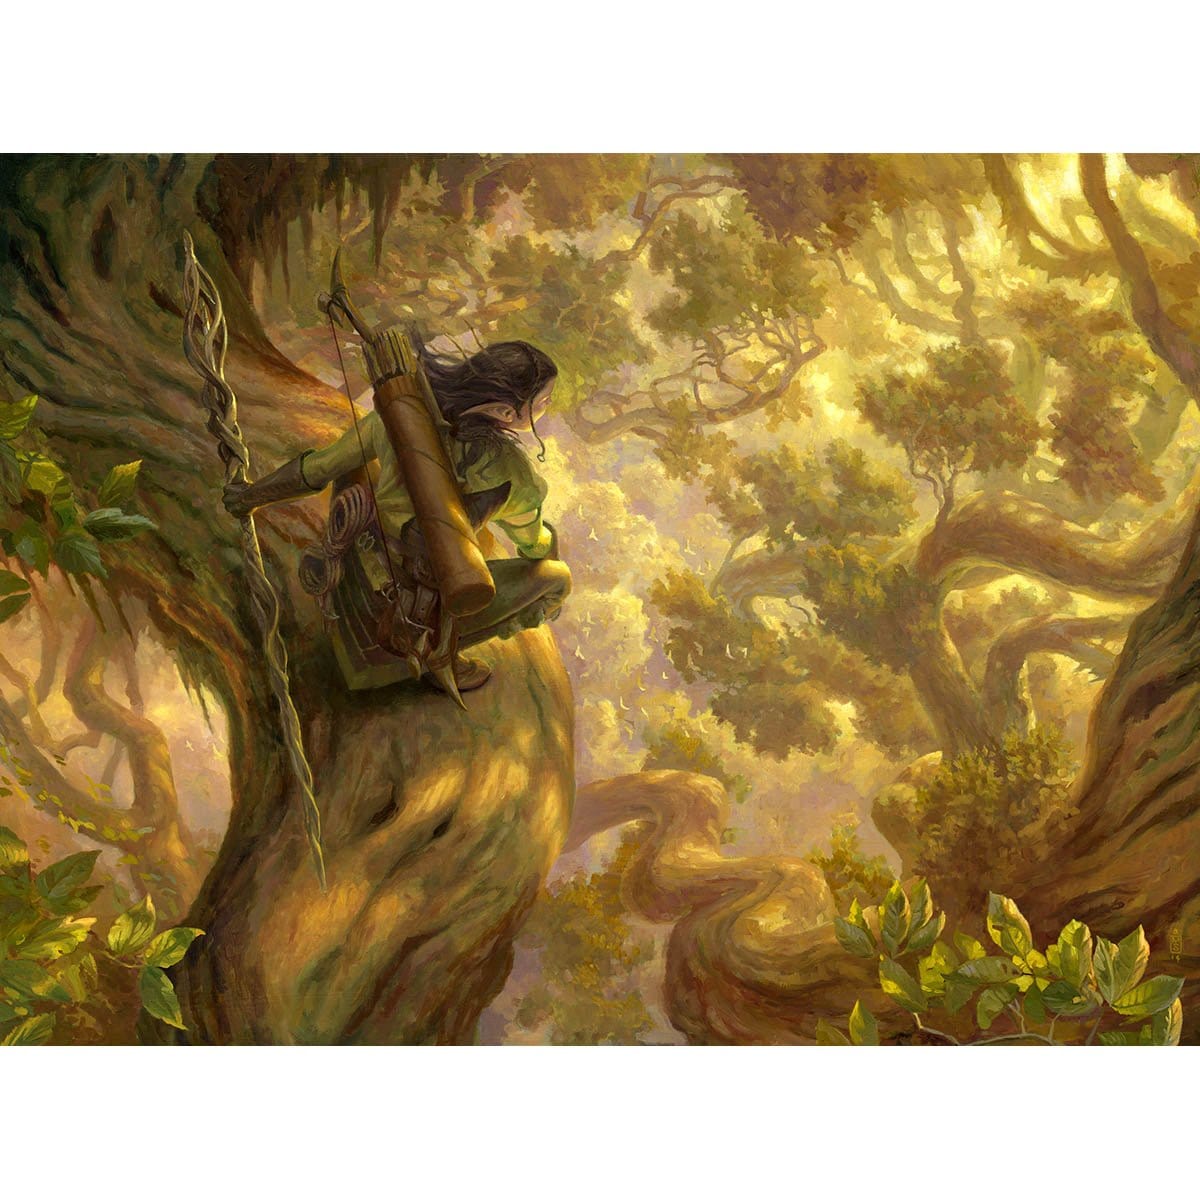 Nissa's Pilgrimage Print - Print - Original Magic Art - Accessories for Magic the Gathering and other card games